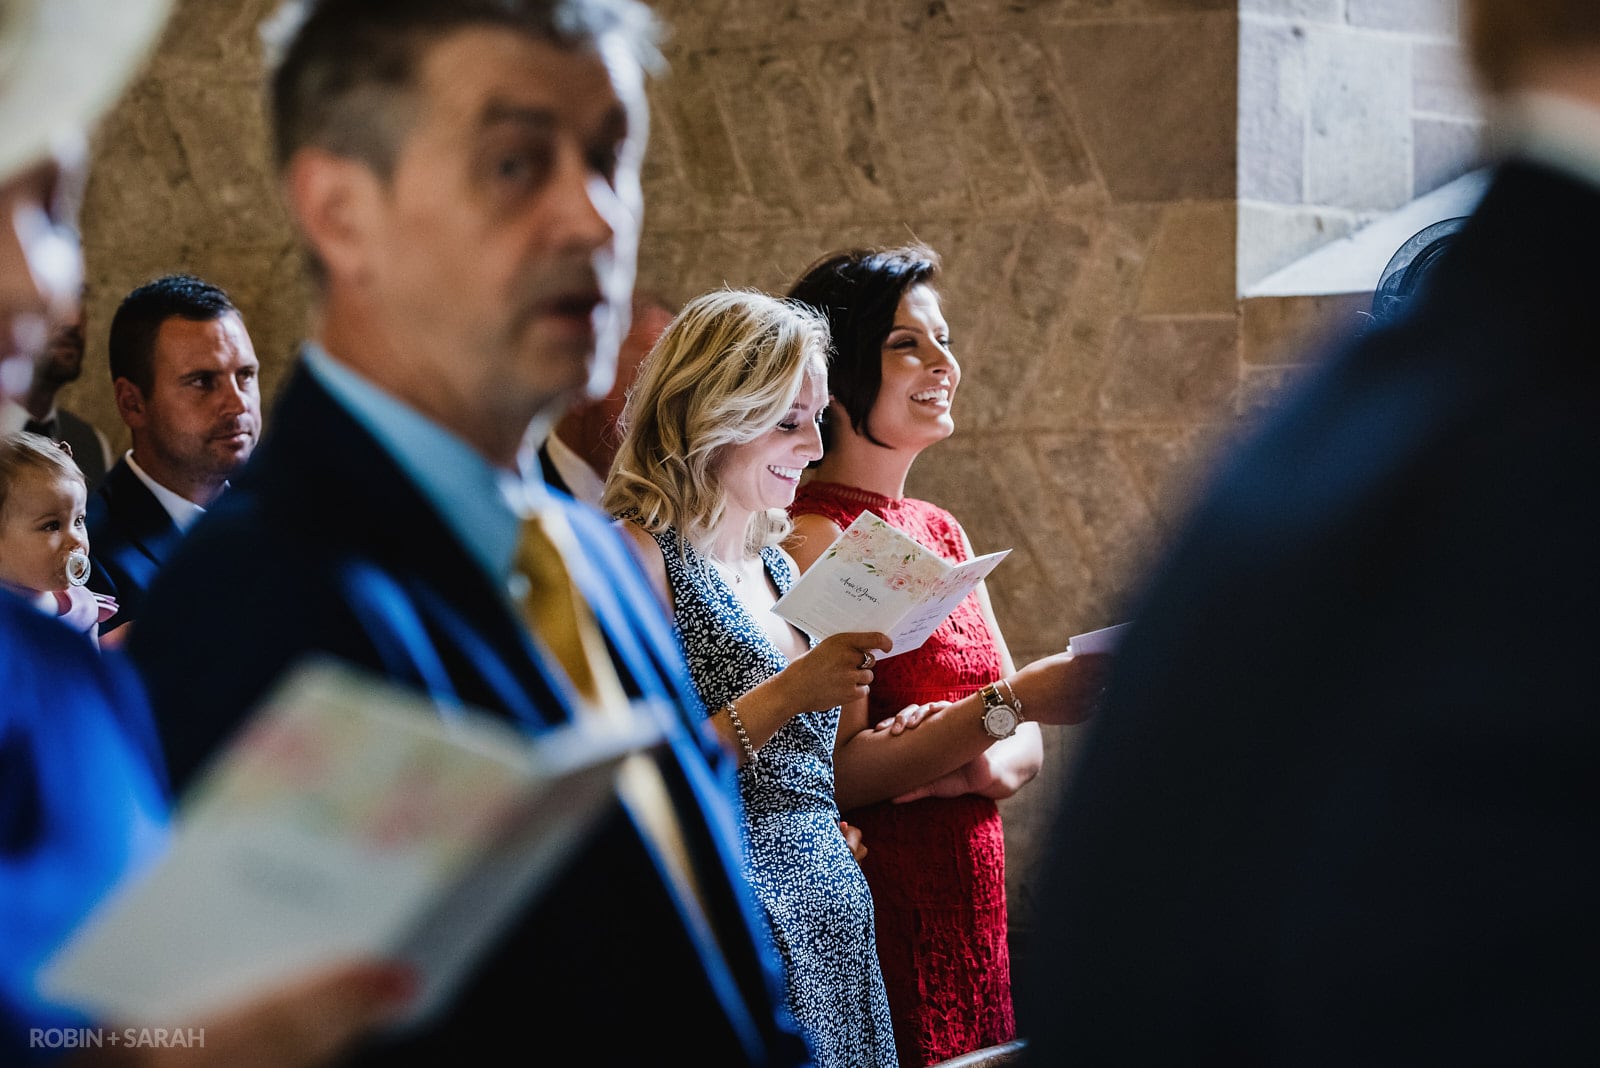 Guests singing at church wedding ceremony